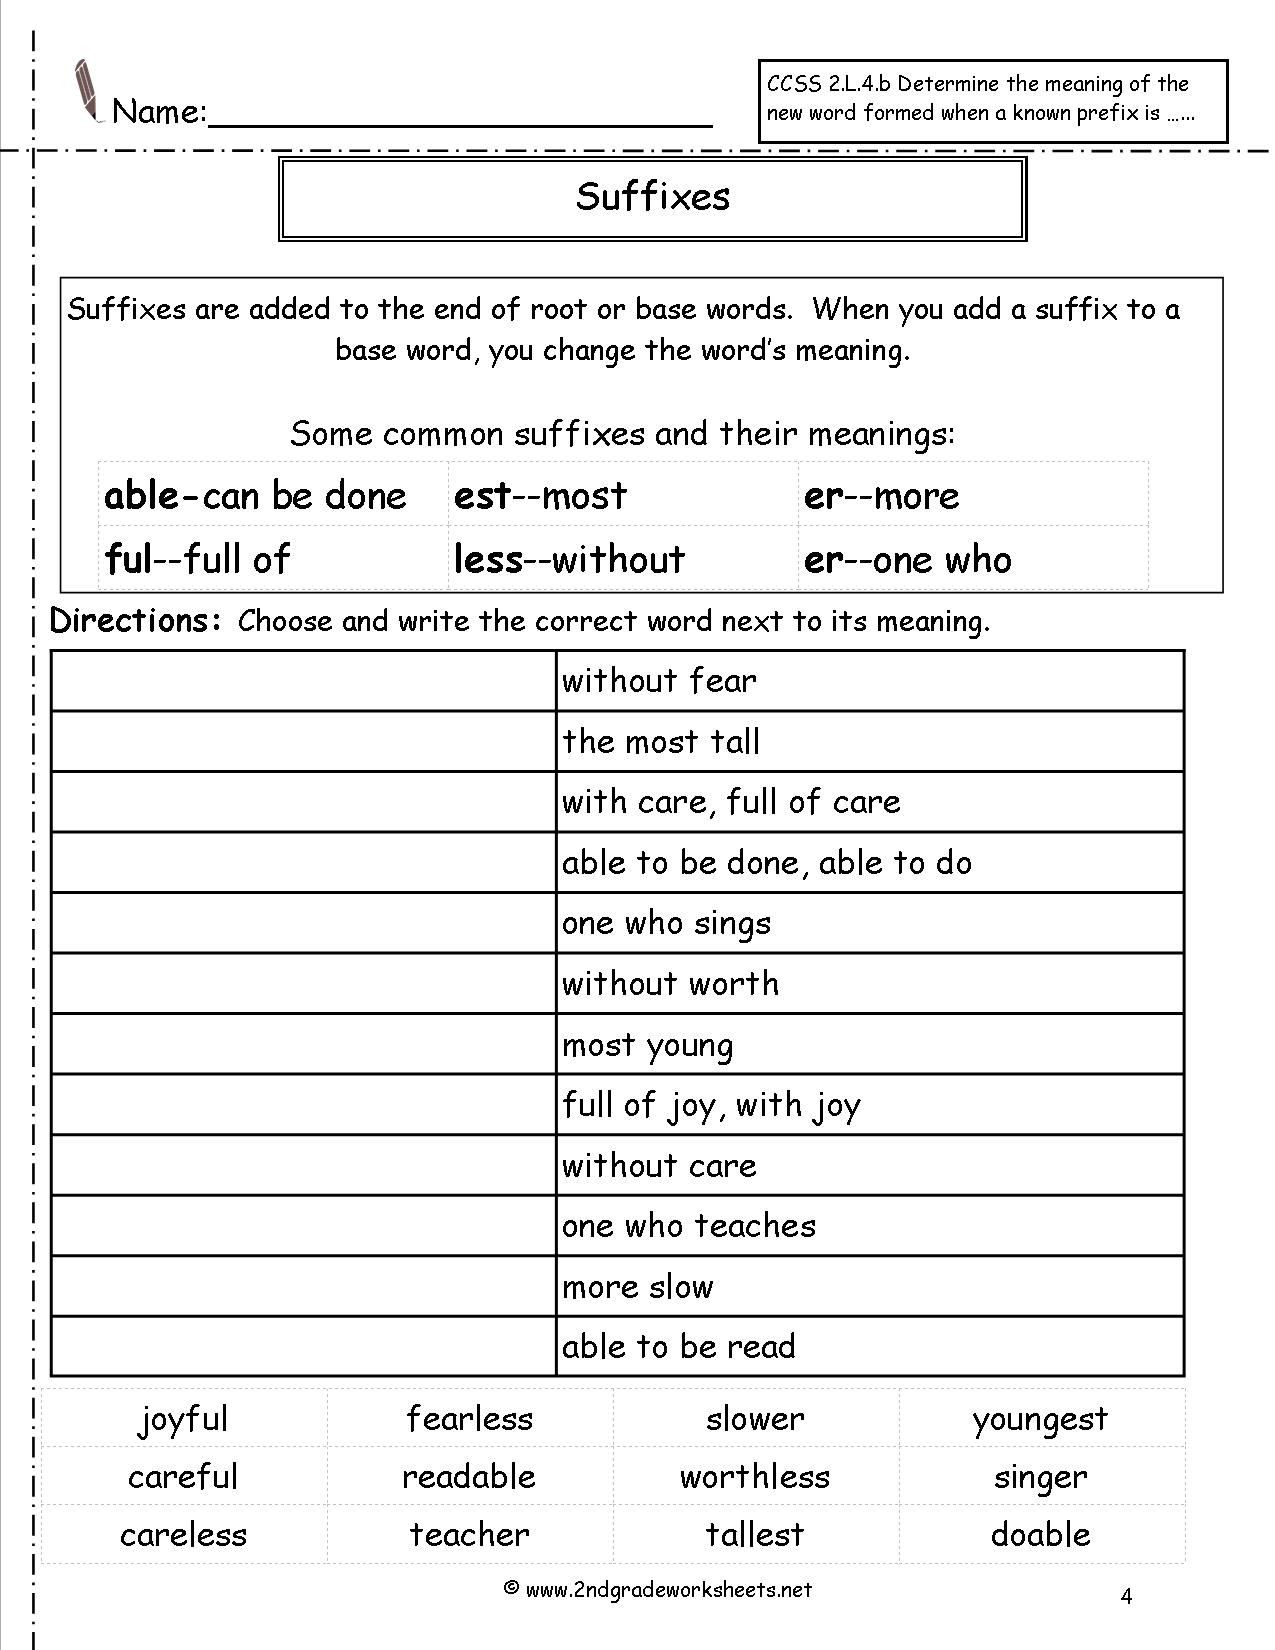 Suffixes Worksheets for 2nd Grade Image Result for Prefixes and Suffixes Anchor Chart